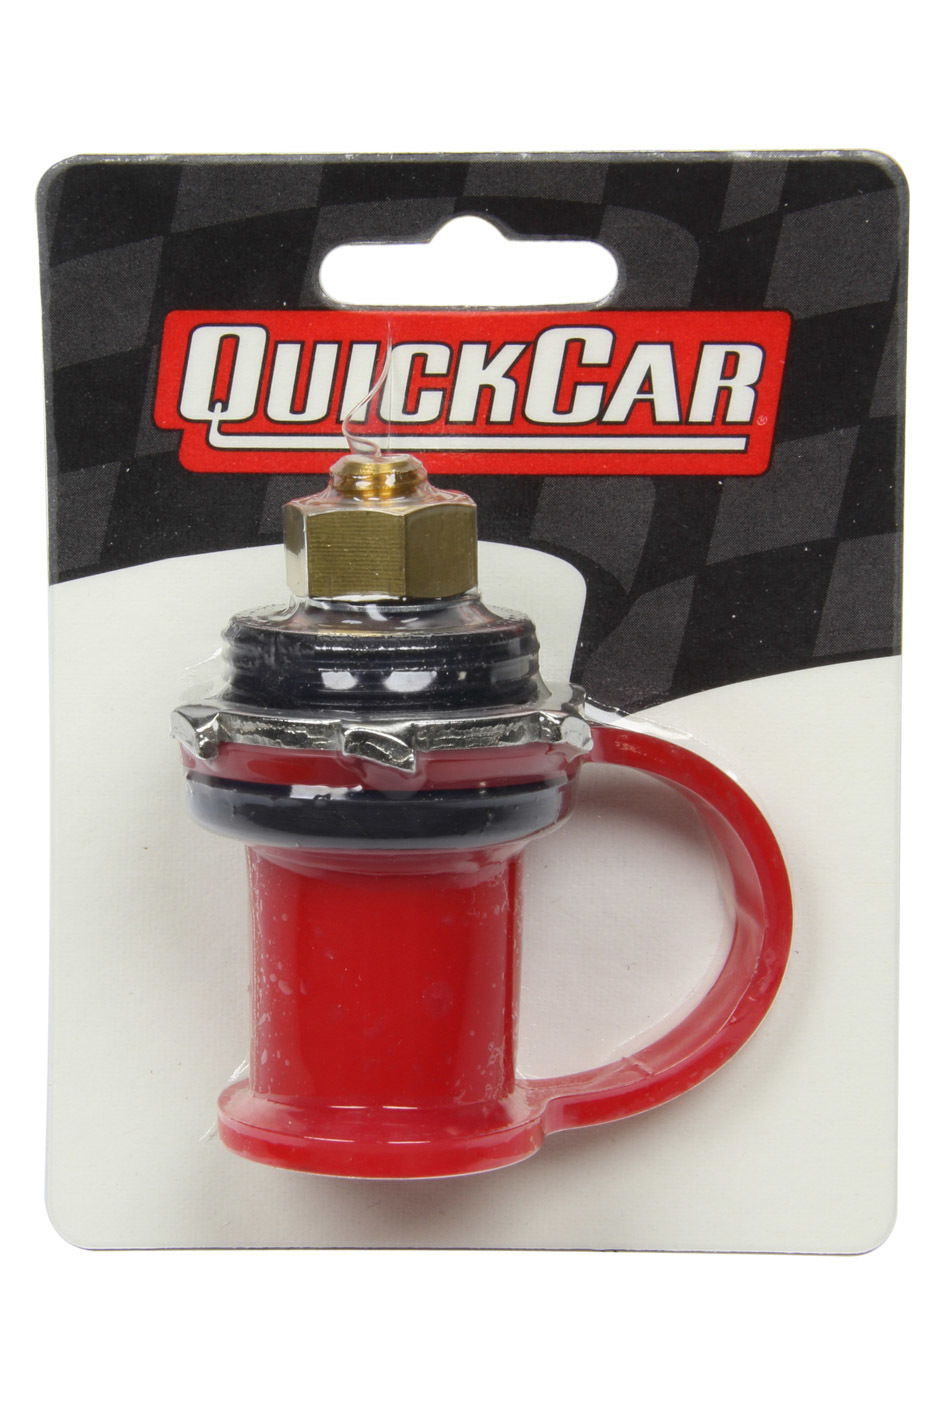 QuickCar 57-701 Remote Battery Terminal, 12V to 16V, 1-1/4 in Diameter Hole, Rubber Cap, Red, Each